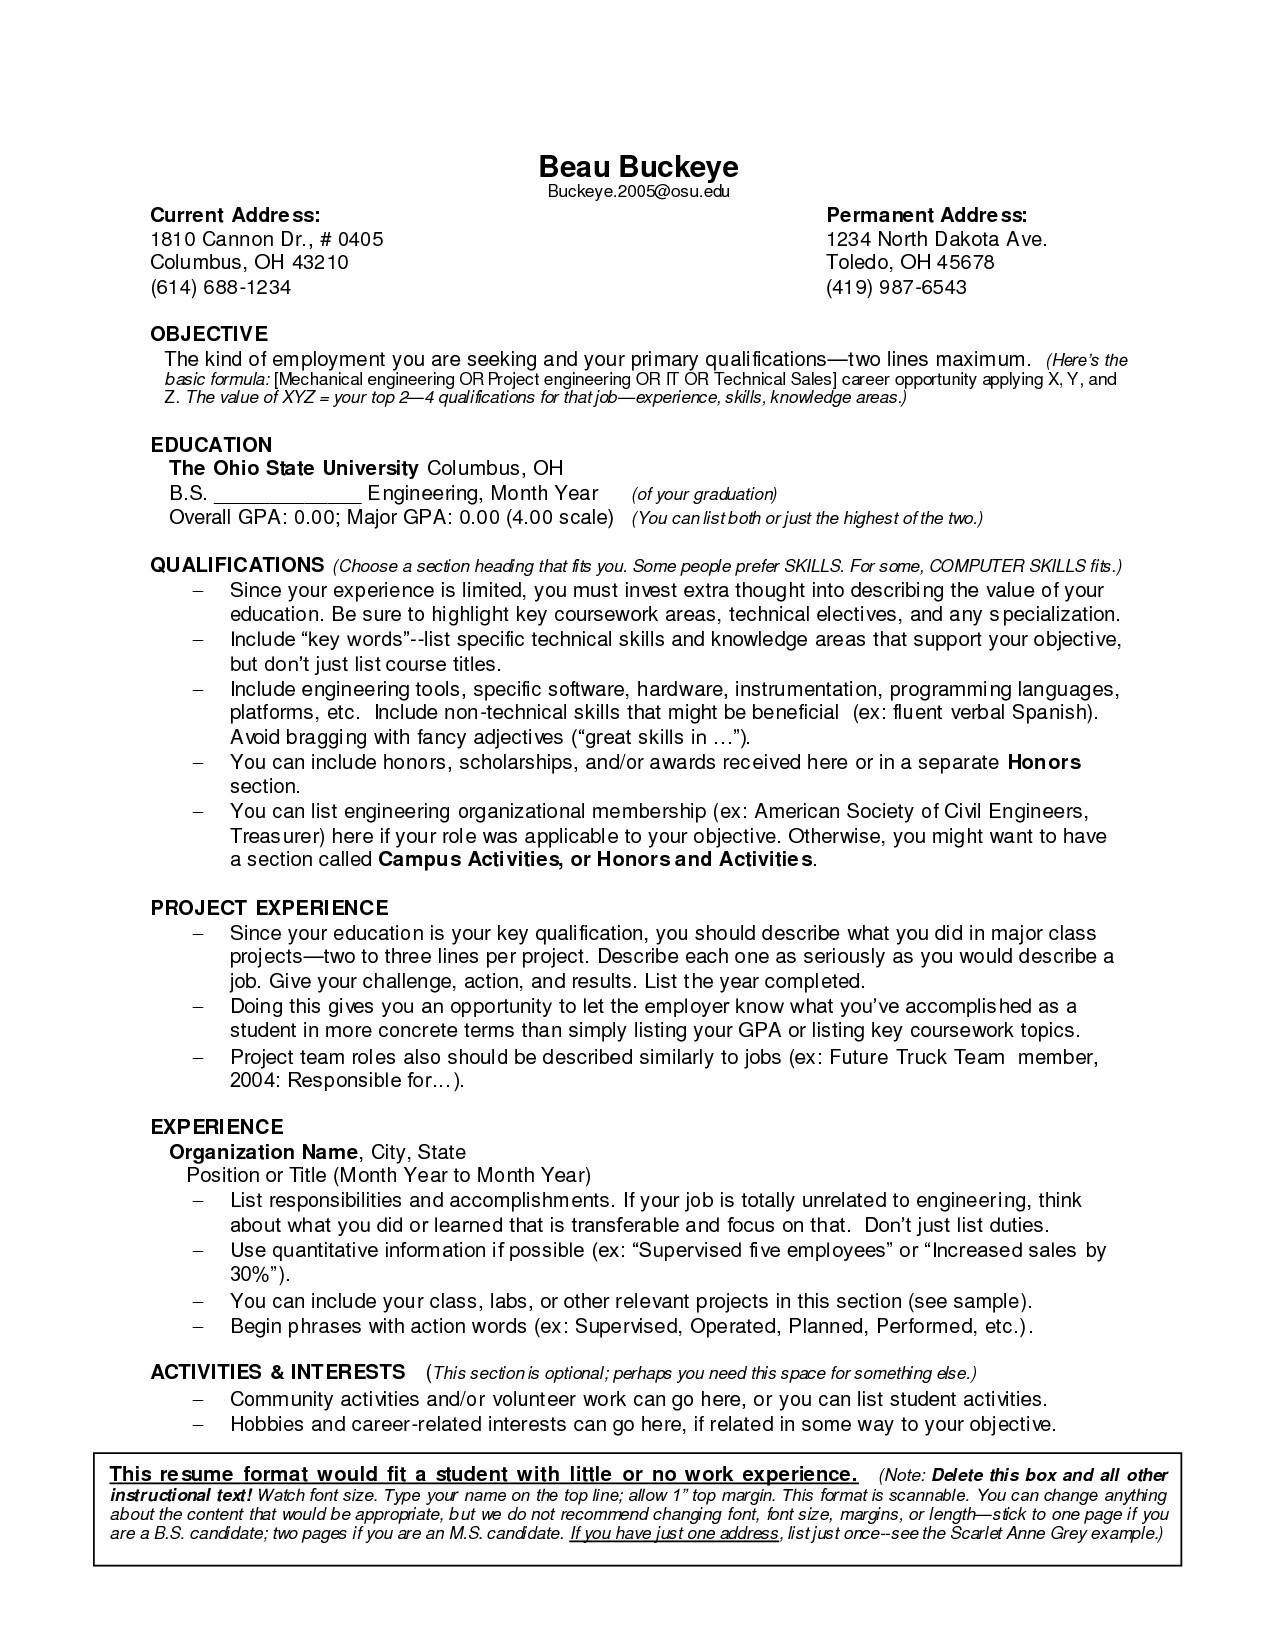 Professional Summary for Resume No Work Experience Sample 14 Professional Summary for Resume No Work Experience